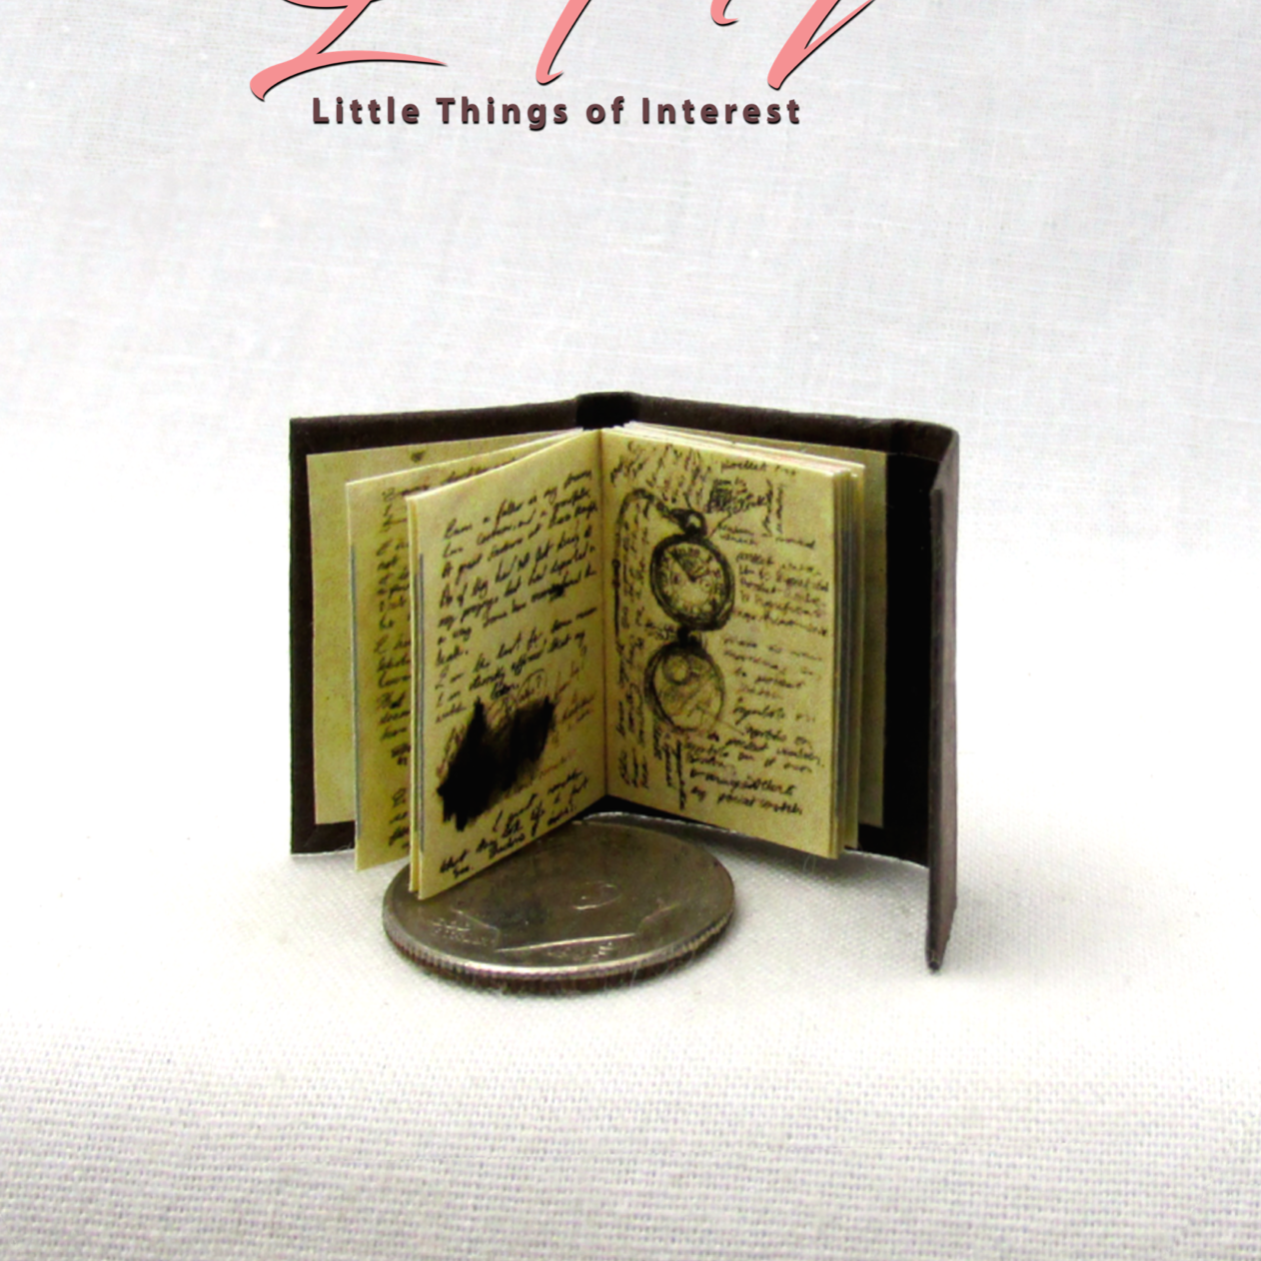 JOURNAL OF IMPOSSIBLE THINGS 1:12 Scale Miniature Readable Illustrated Book Little THINGS of Interest N/A